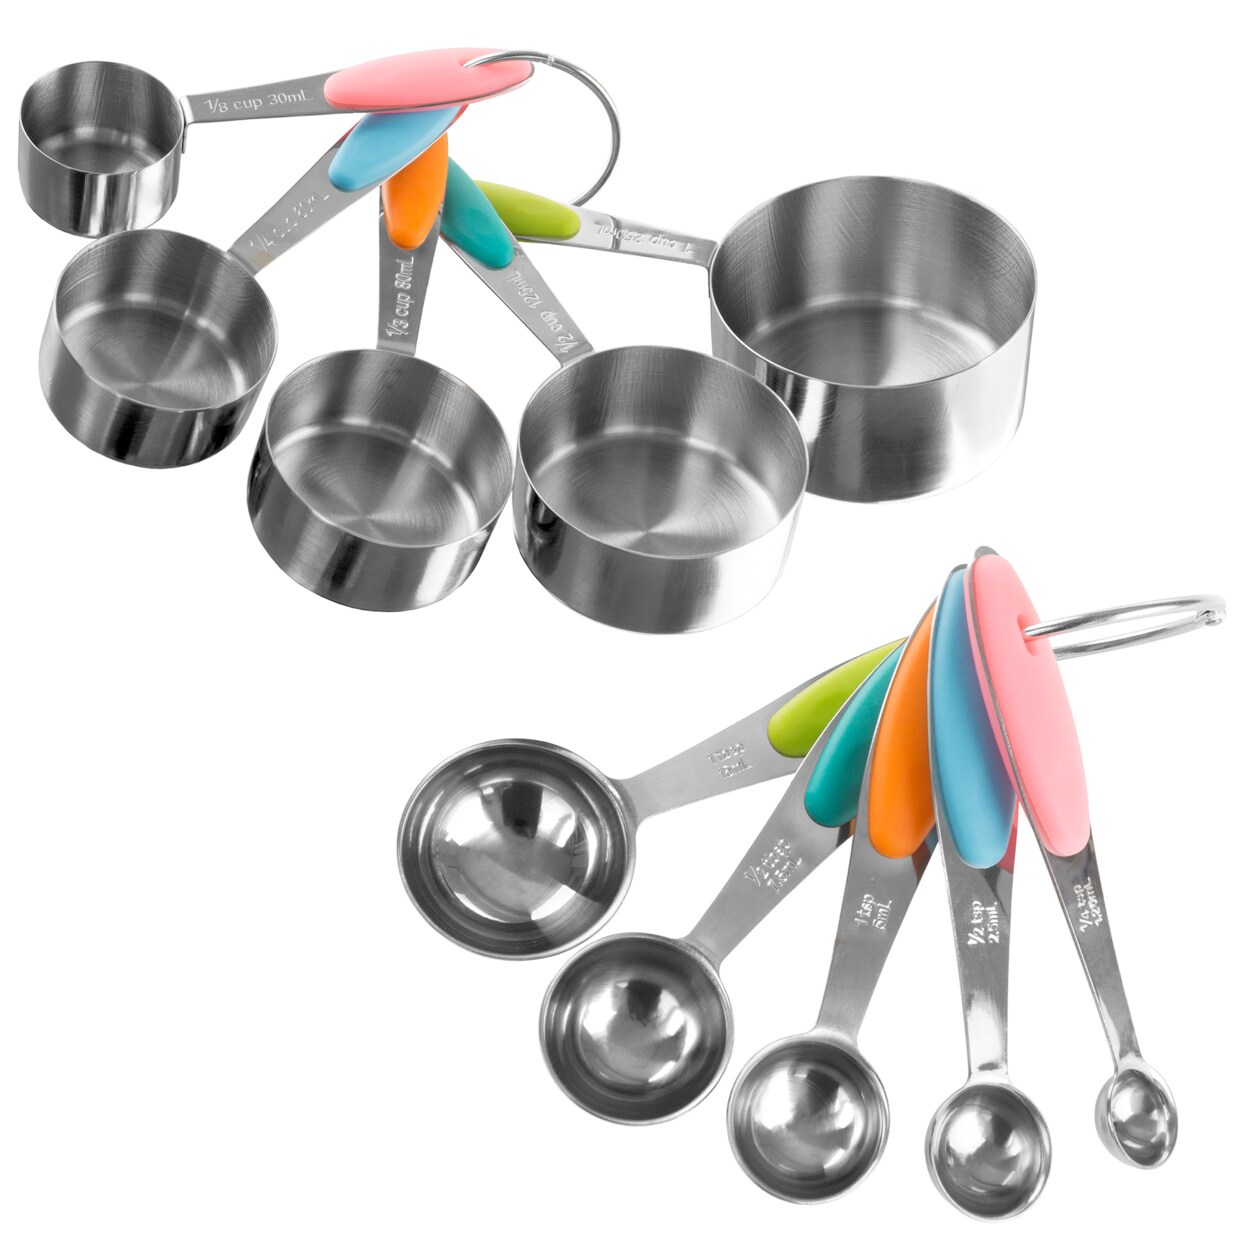 Classic Cuisine Measuring Cups and Spoons Matching Set Stainless Steel  Silicone Handles Cups TBSP and Metric